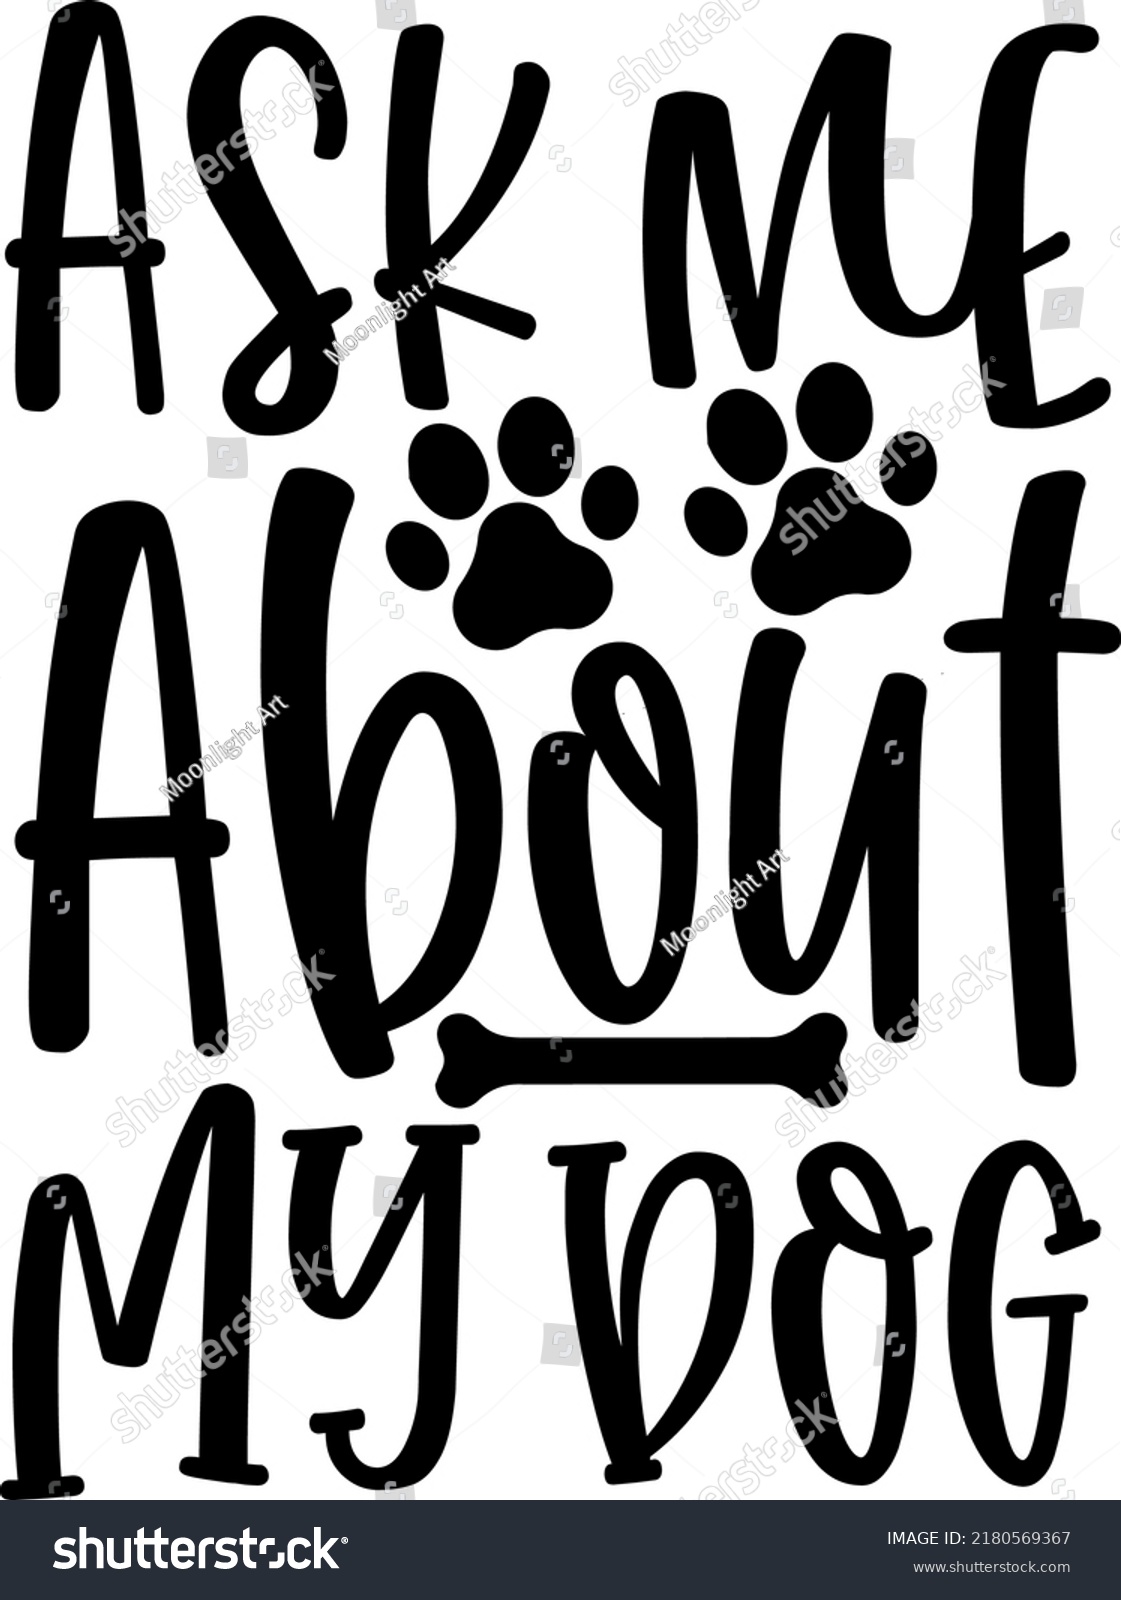 SVG of Ask me about my dog svg, Instant download, Printable cut file, Commercial use, Dog mom svg, Dog shirt print, Saying quote svg